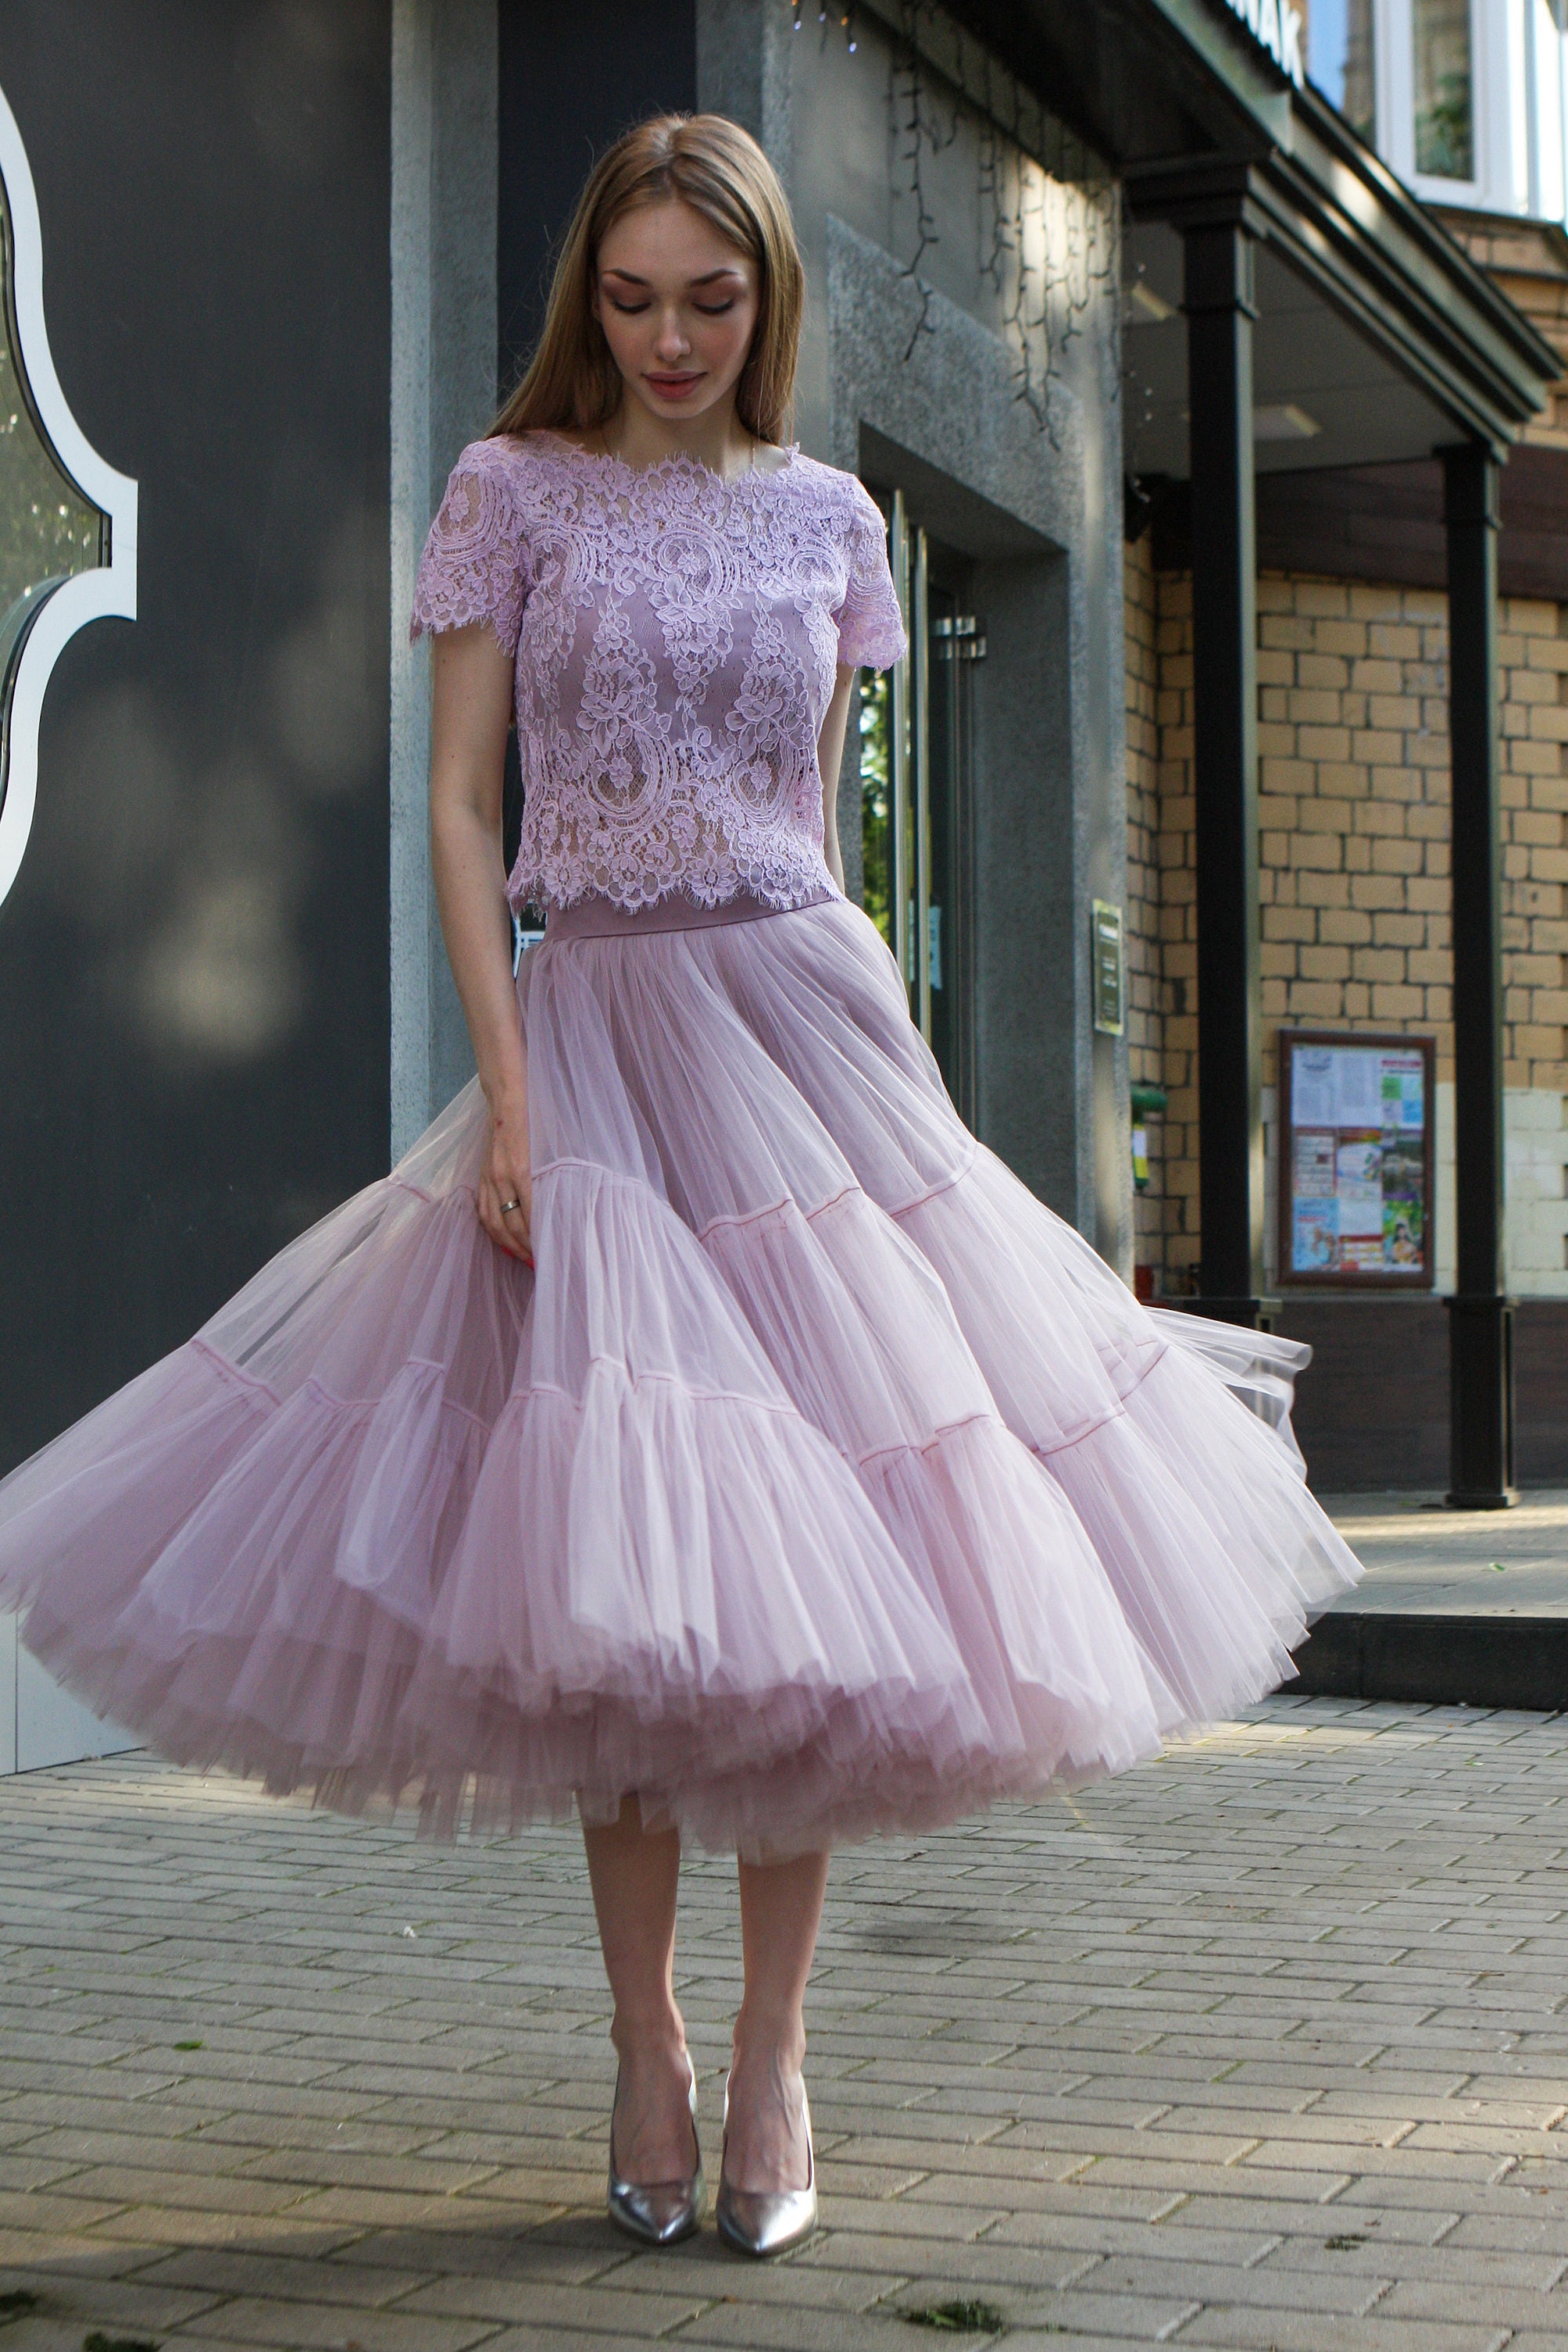 Tiered Tulle Skirt + Sweet Pink Beret